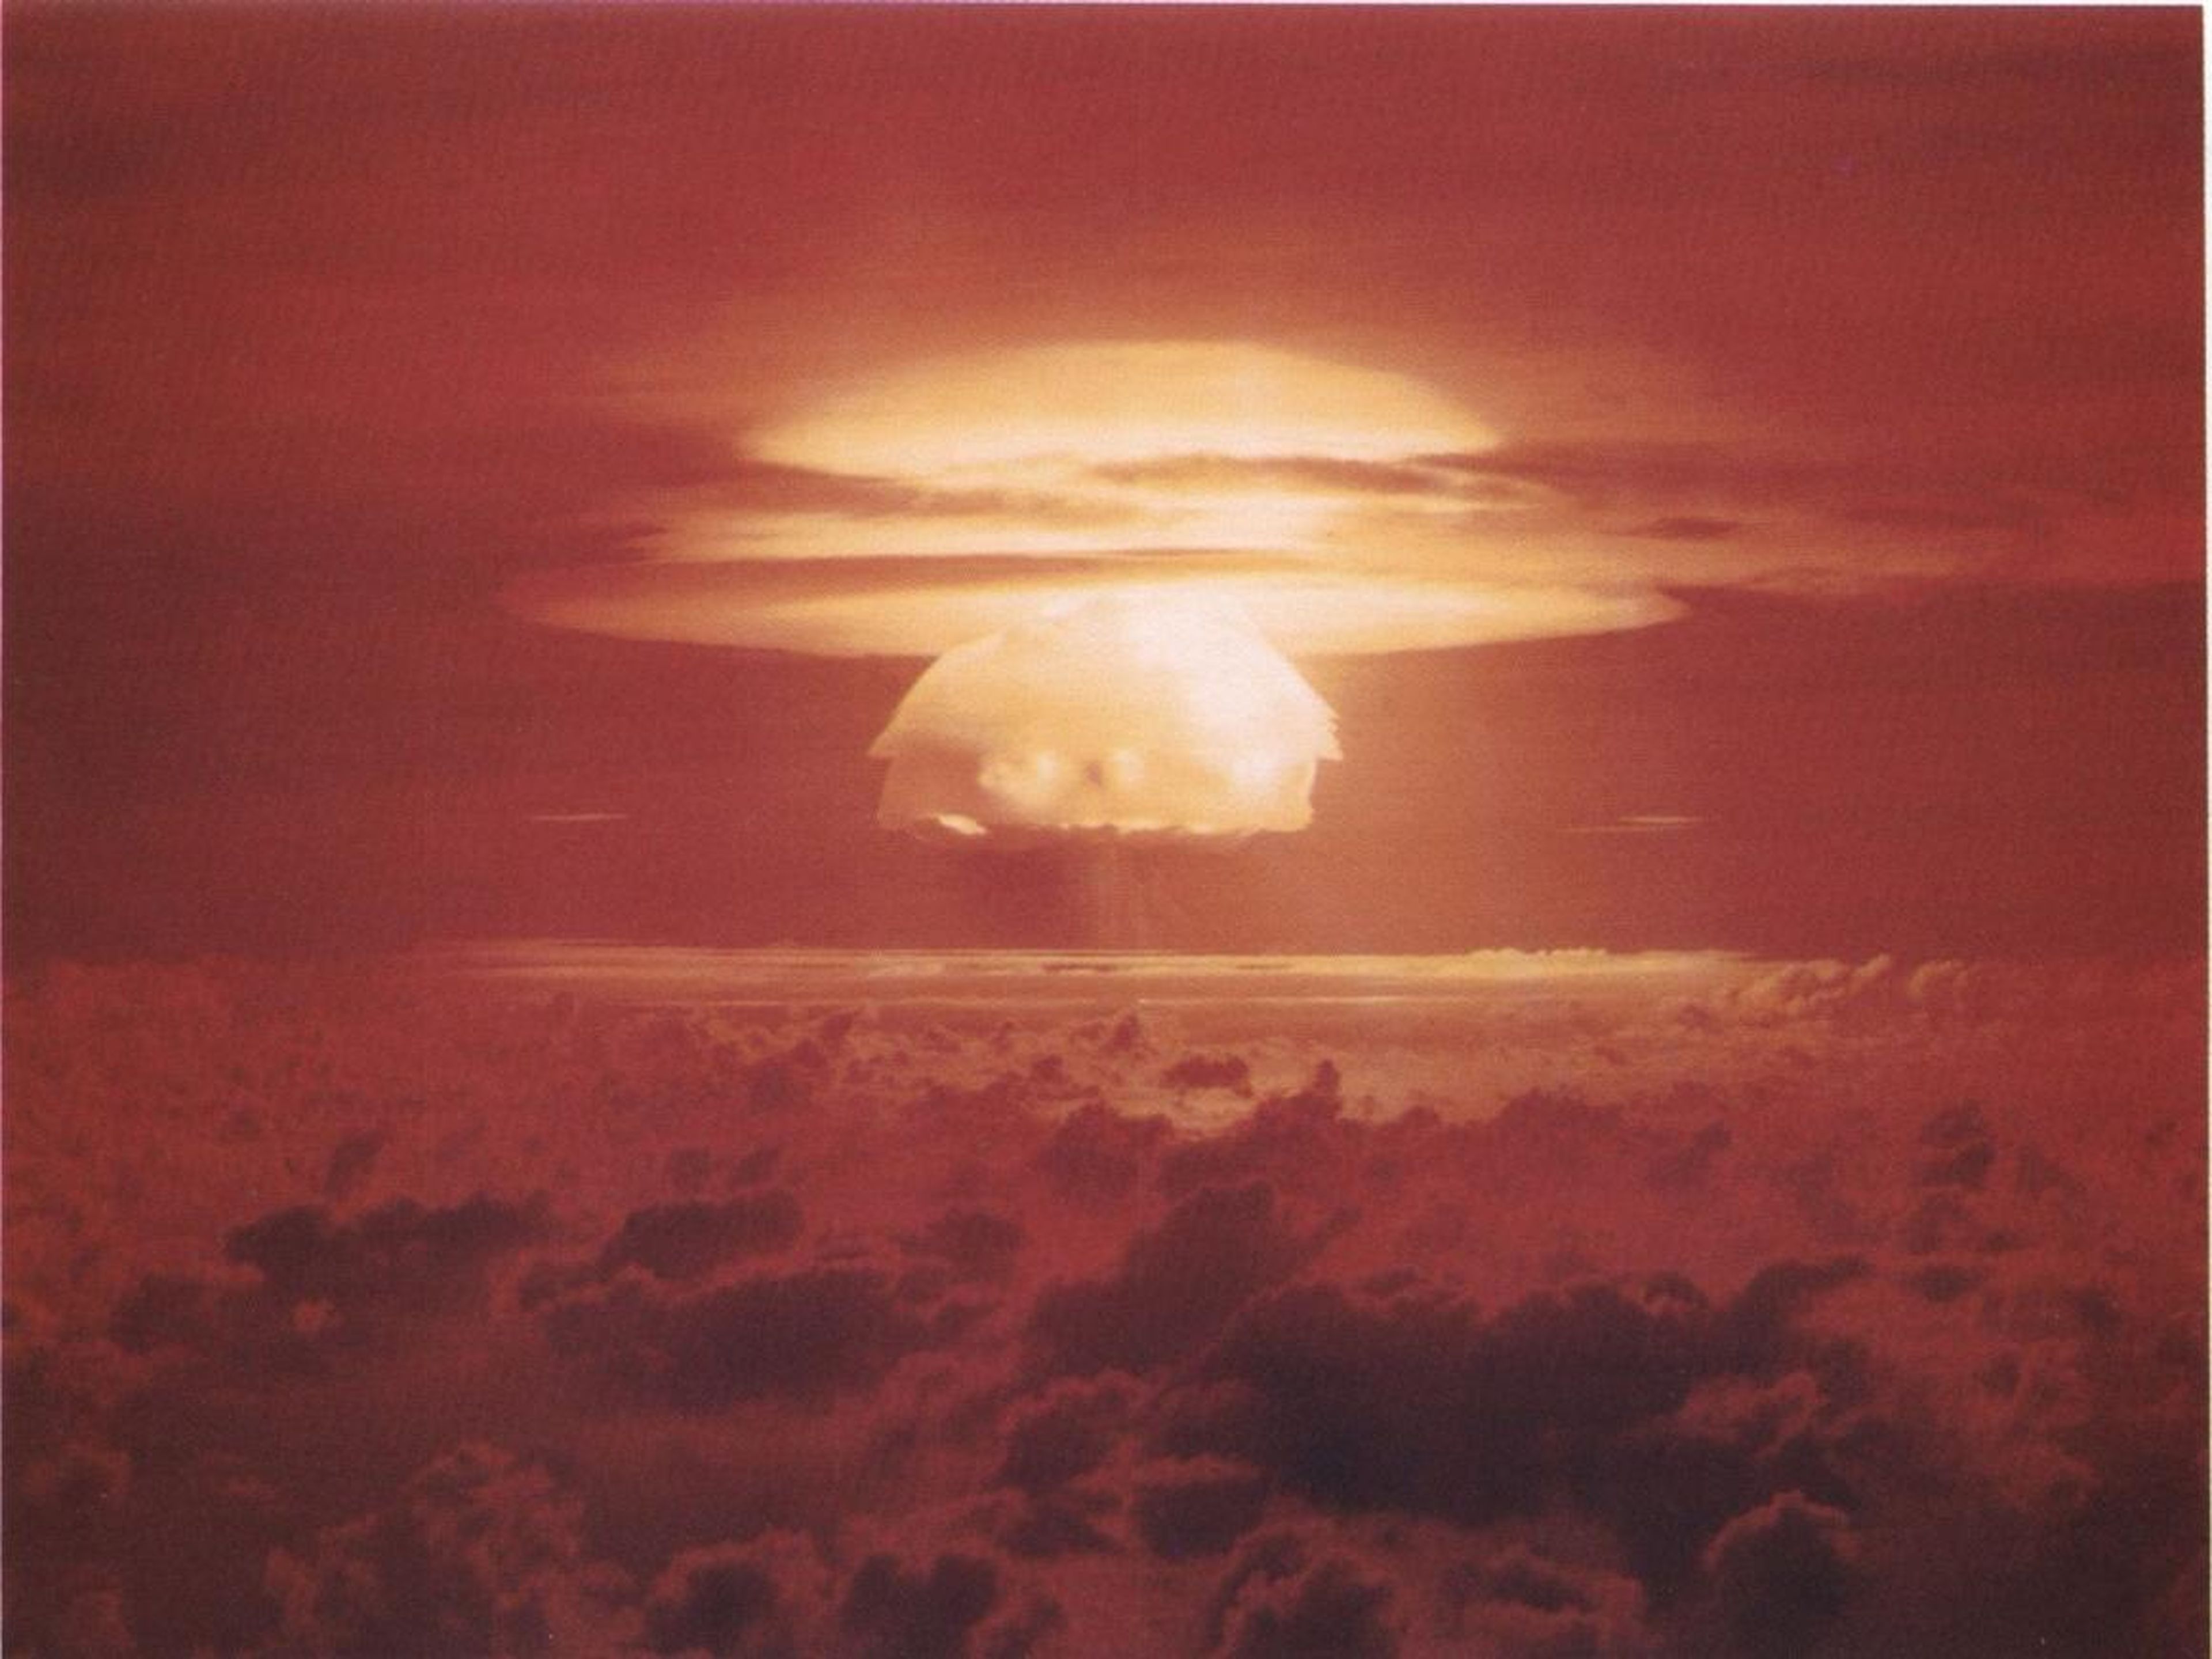 A photo of the US Castle Bravo thermonuclear weapons test in the Pacific Ocean on March 1, 1954.